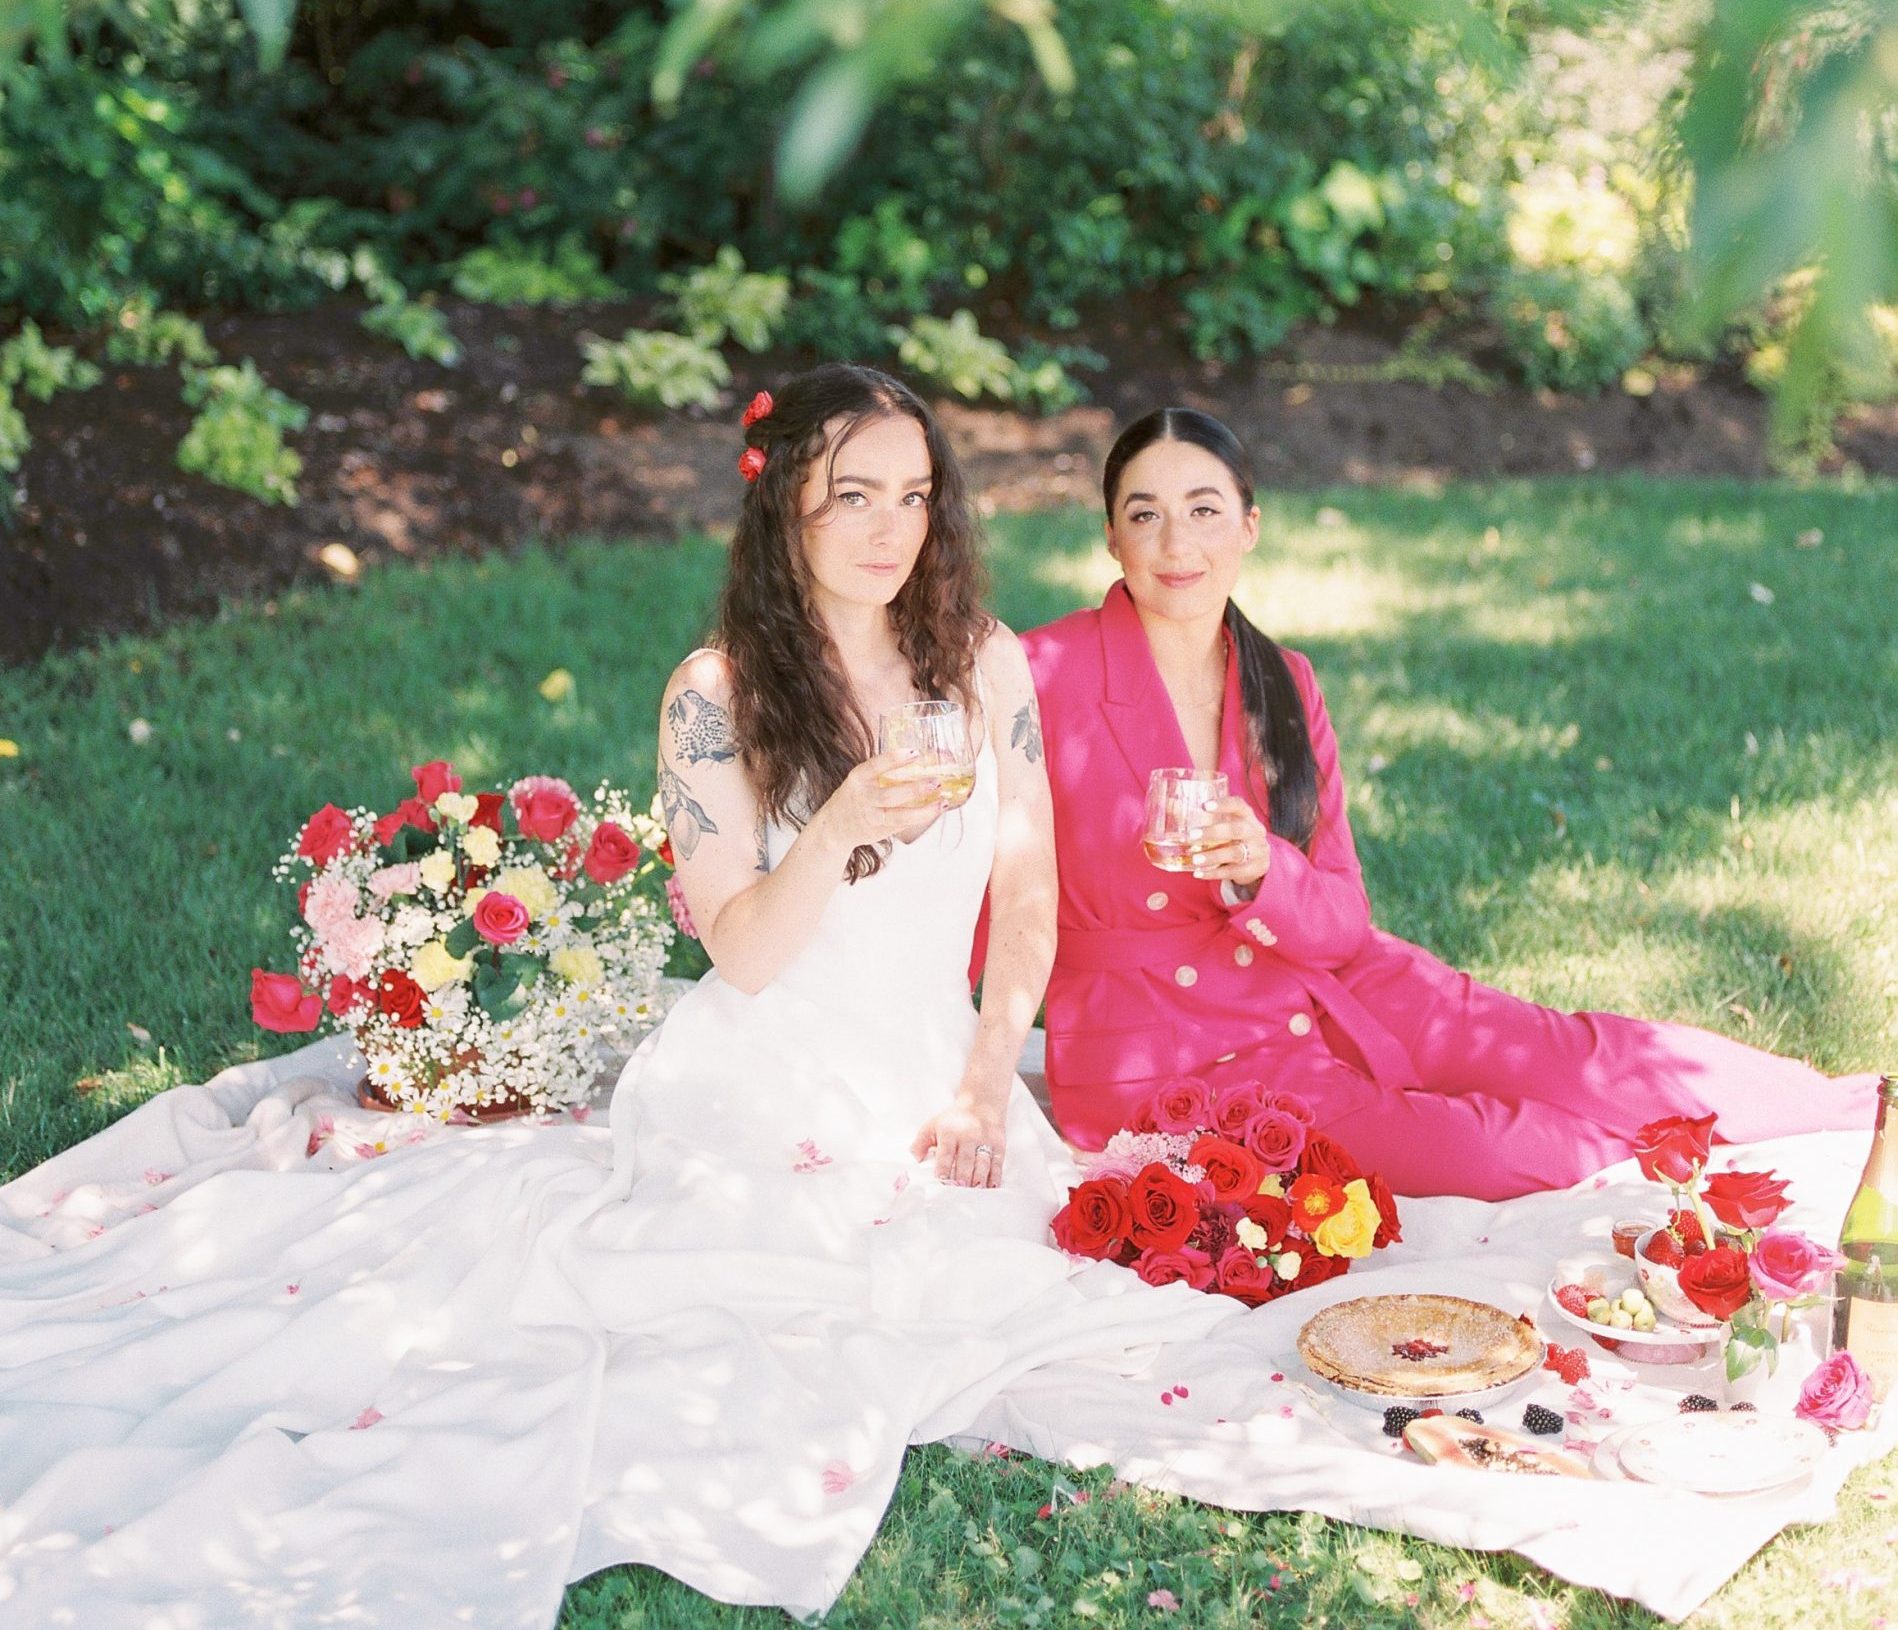 Hot Pink Perfection for this Picnic in the Park Valentine's Day Inspiration Featured by Brontë Bride